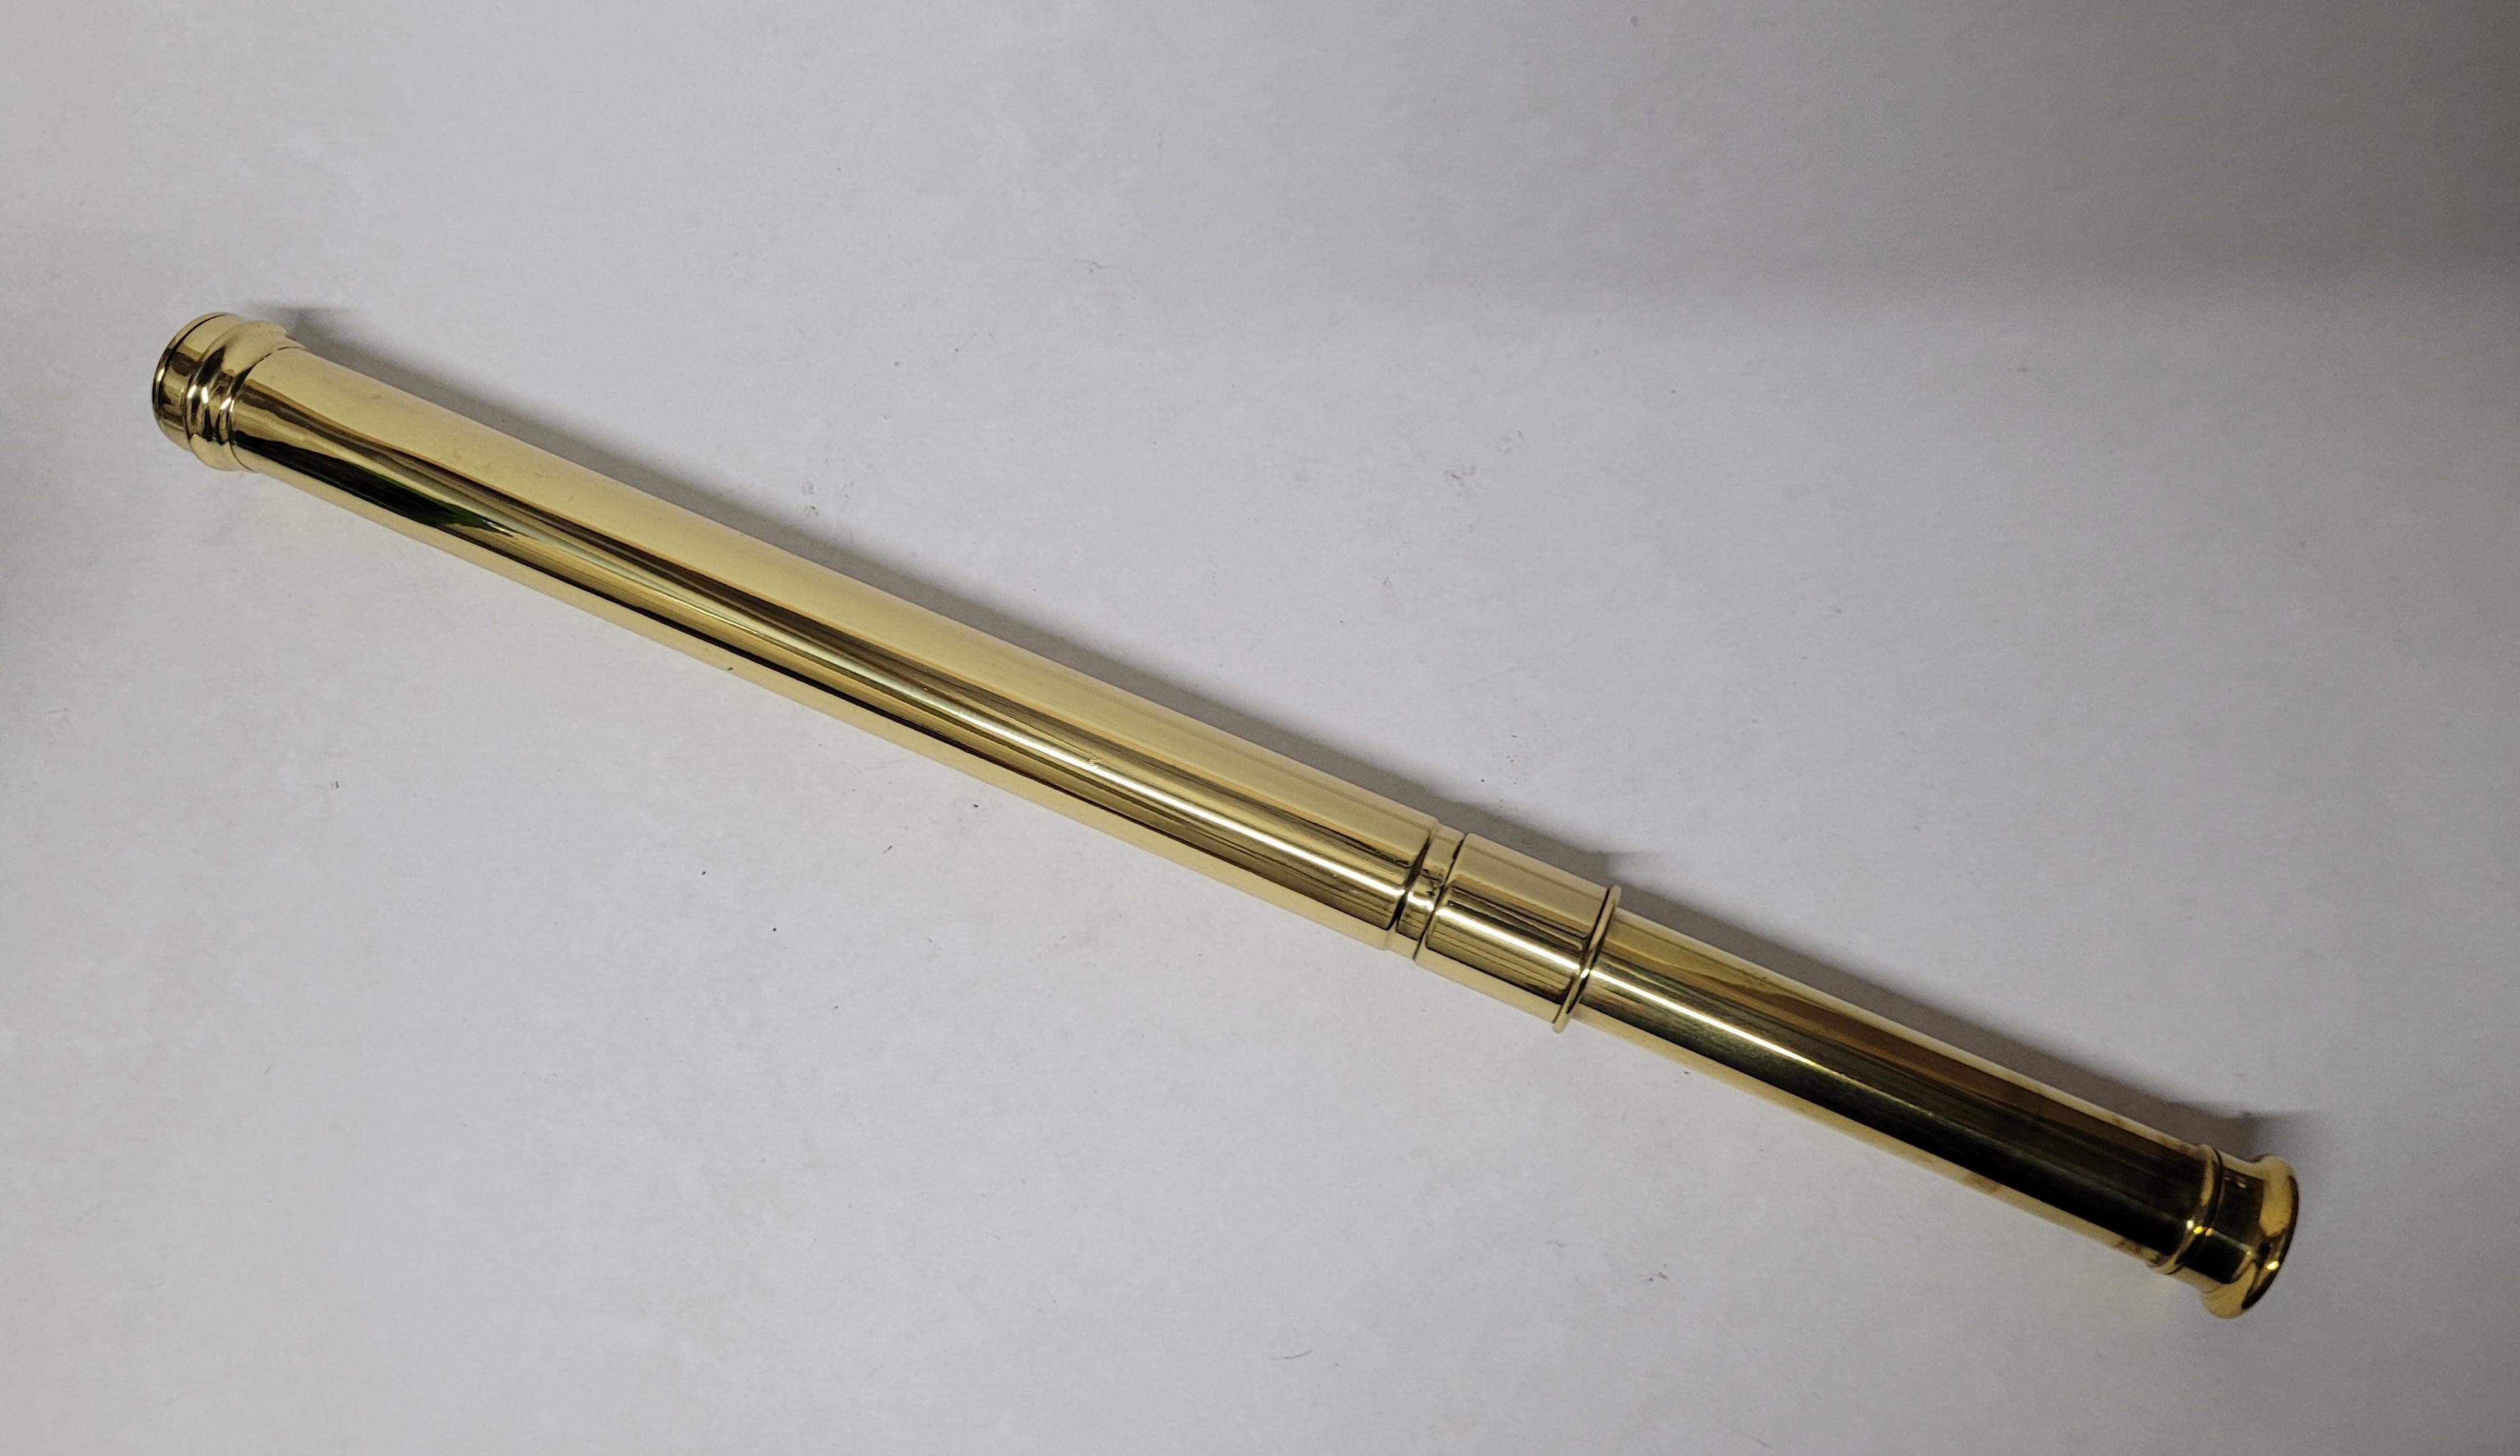 Ships spyglass telescope appropriate for use on a yacht, ship, or anywhere with a view. This has been meticulously polished and lacquered. We just restored a great collection of these. This fine instrument has a draw barrel of ?. The focal tube is